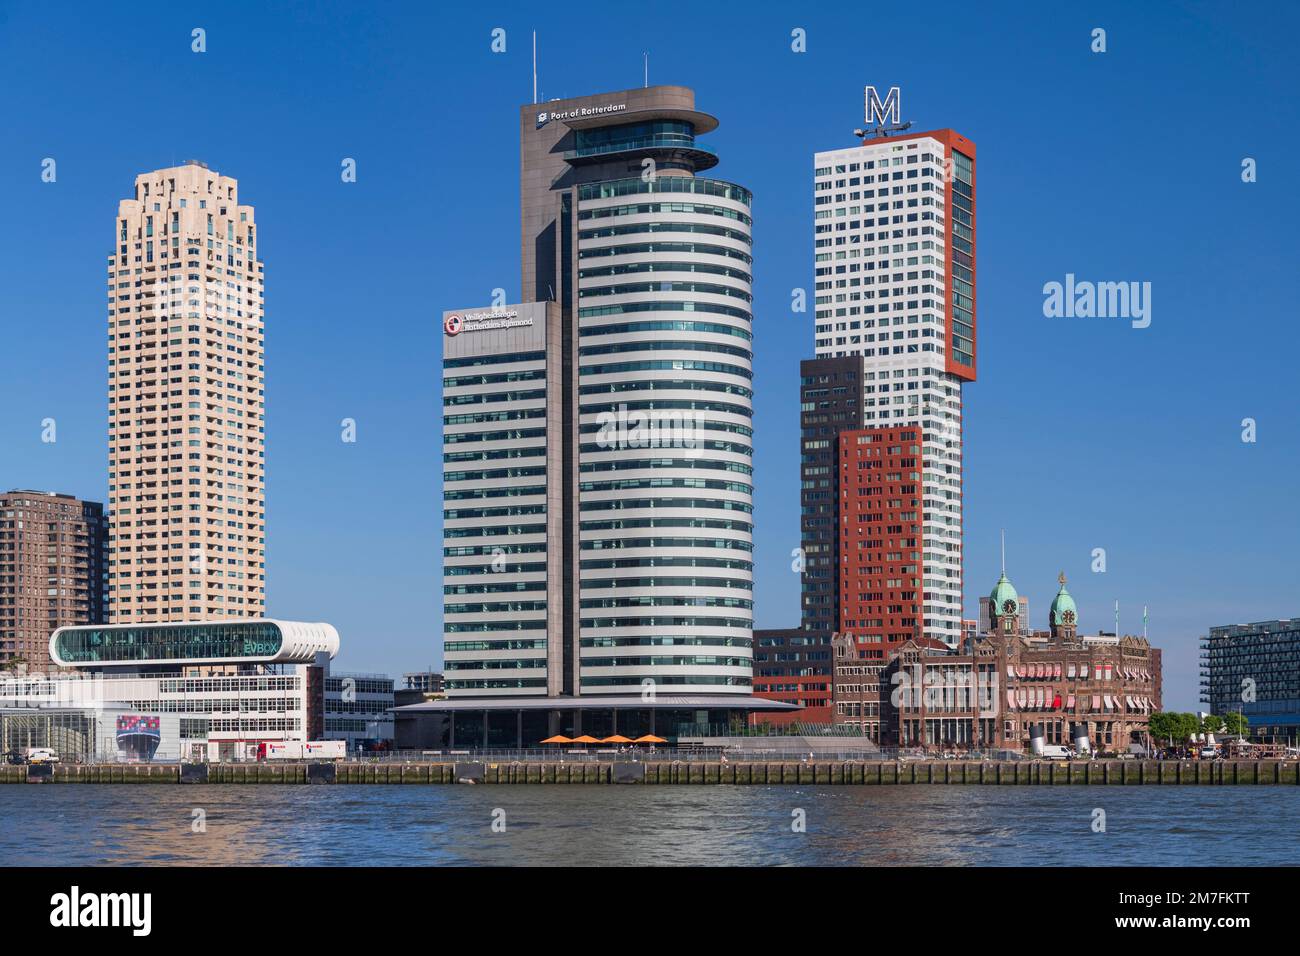 Holland, Rotterdam, The Nieuwe Maas River with the following buildings from left to right, the New Orleans Tower, the World Port Centre, the Montevideo Tower and Hotel New York which is situated in the restored former headquarters of the Holland-America Line. Stock Photo